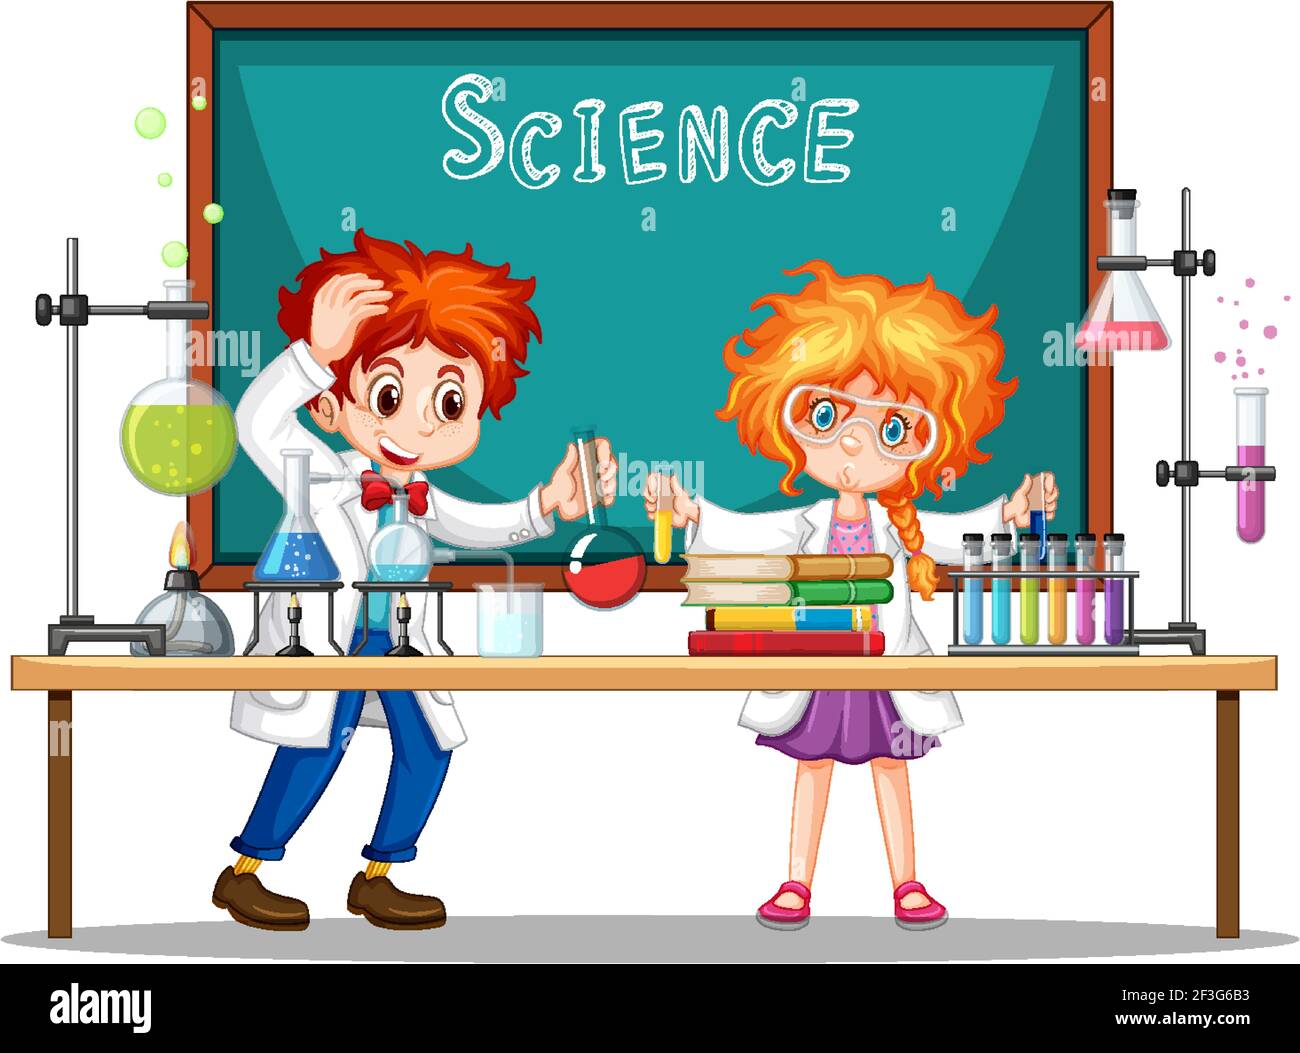 Researcher experiment in the laboratory illustration Stock Vector